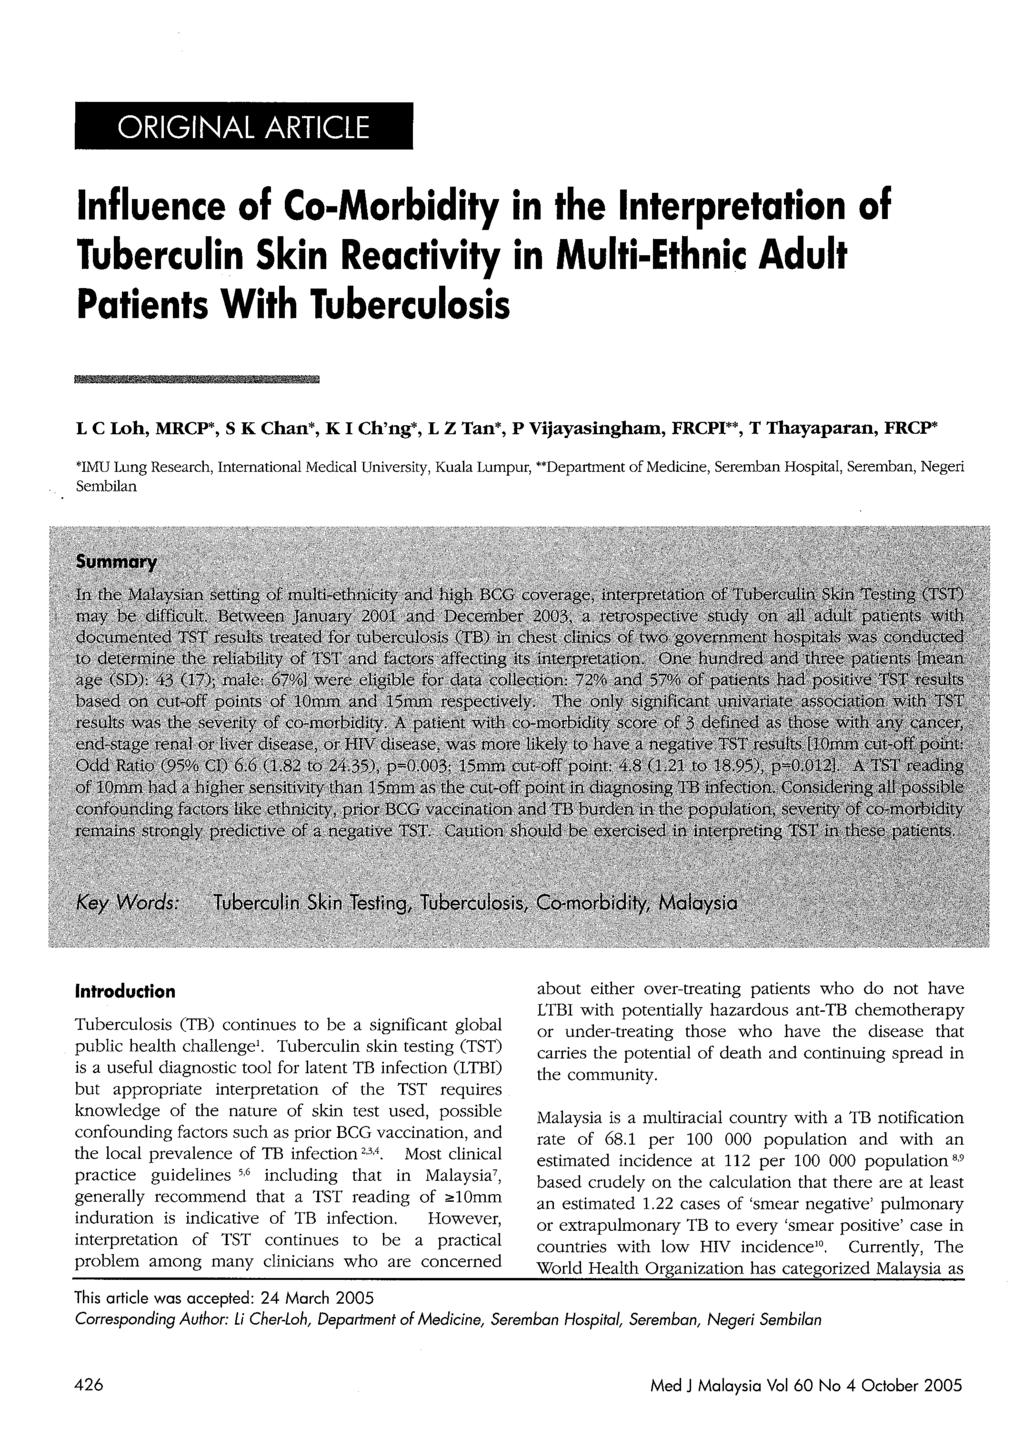 ORIGINAL ARTICLE Influence of Co-Morbidity in the Interpretation of Tuberculin Skin Reactivity in Multi-Ethnic Adult Patients With Tuberculosis bz &&&J I 7 ae L C Loh, MRCP*, S K Chan*, K I Ch'ng*, L